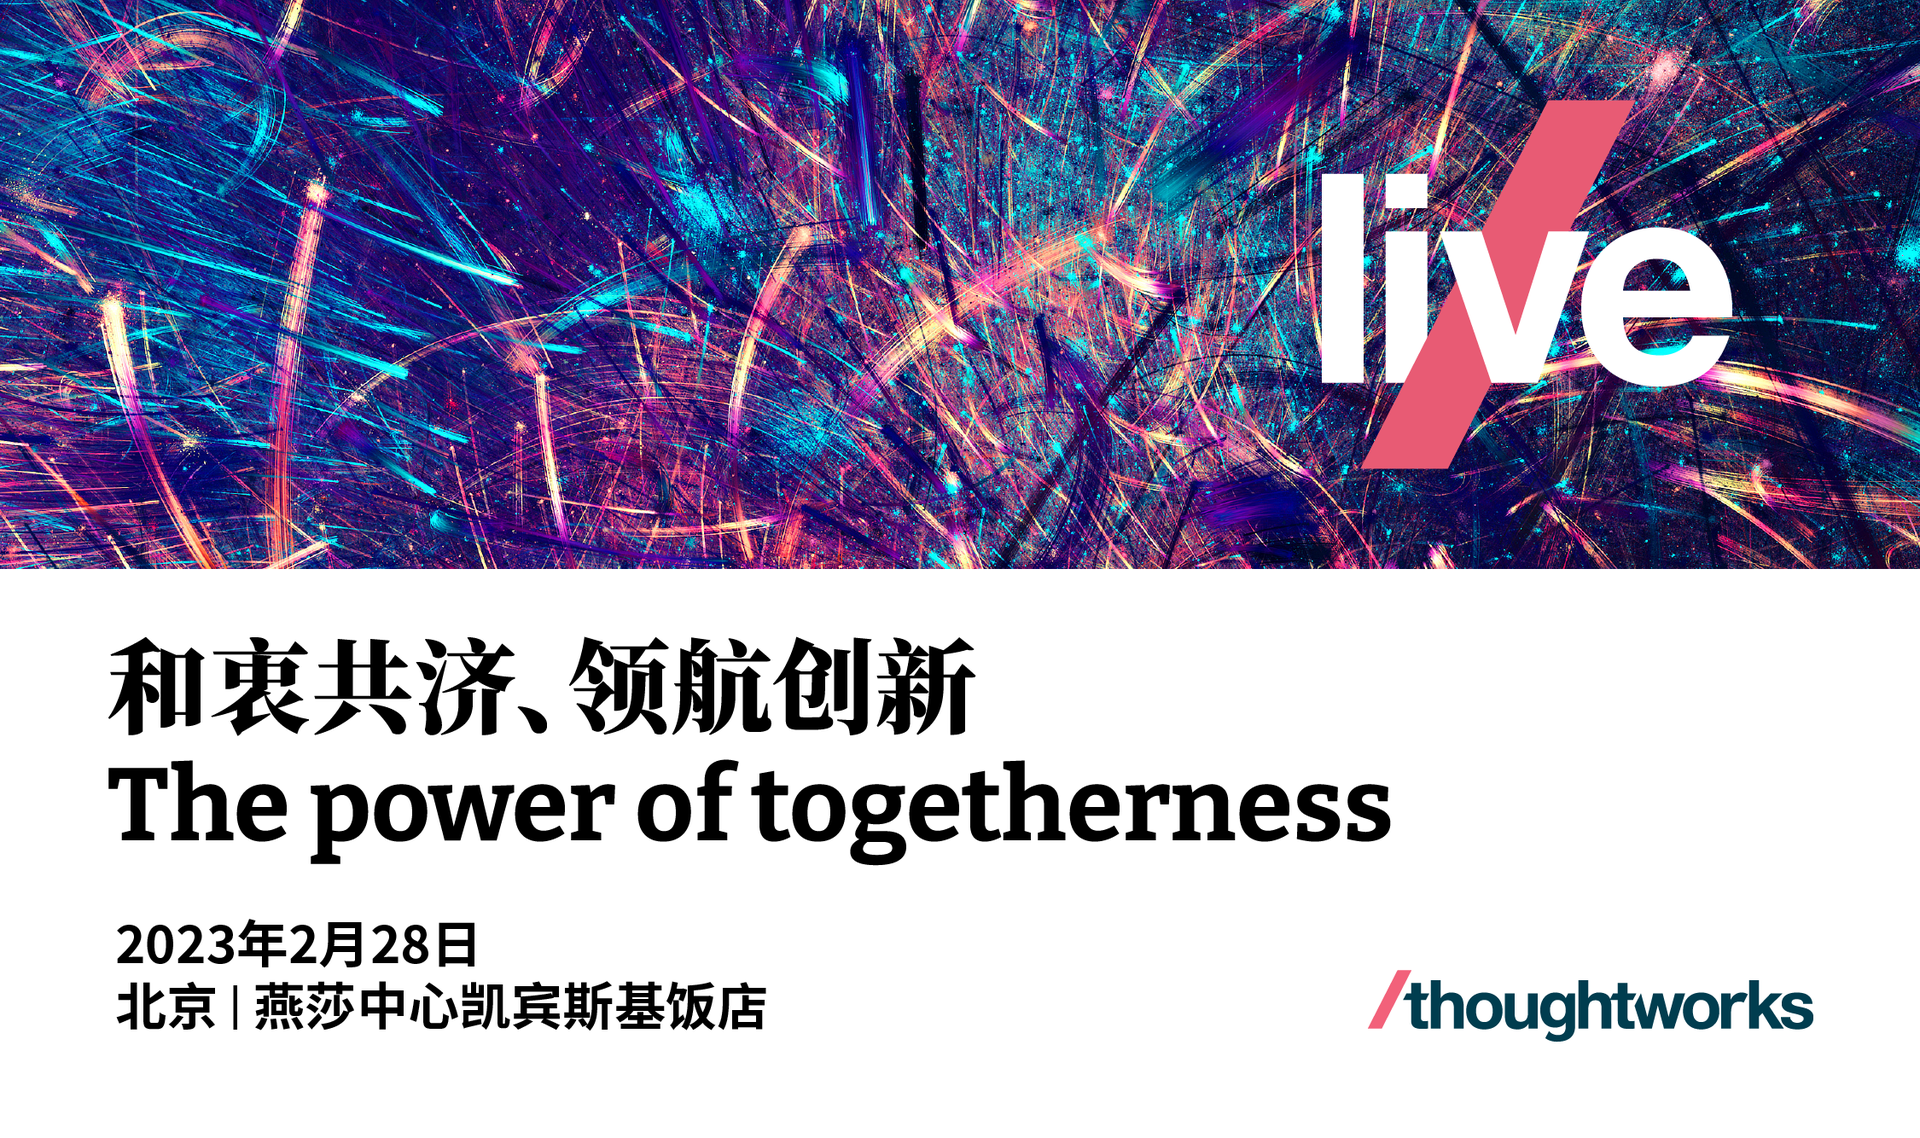 2023 Thoughtworks Live  ｜ The power of togetherness